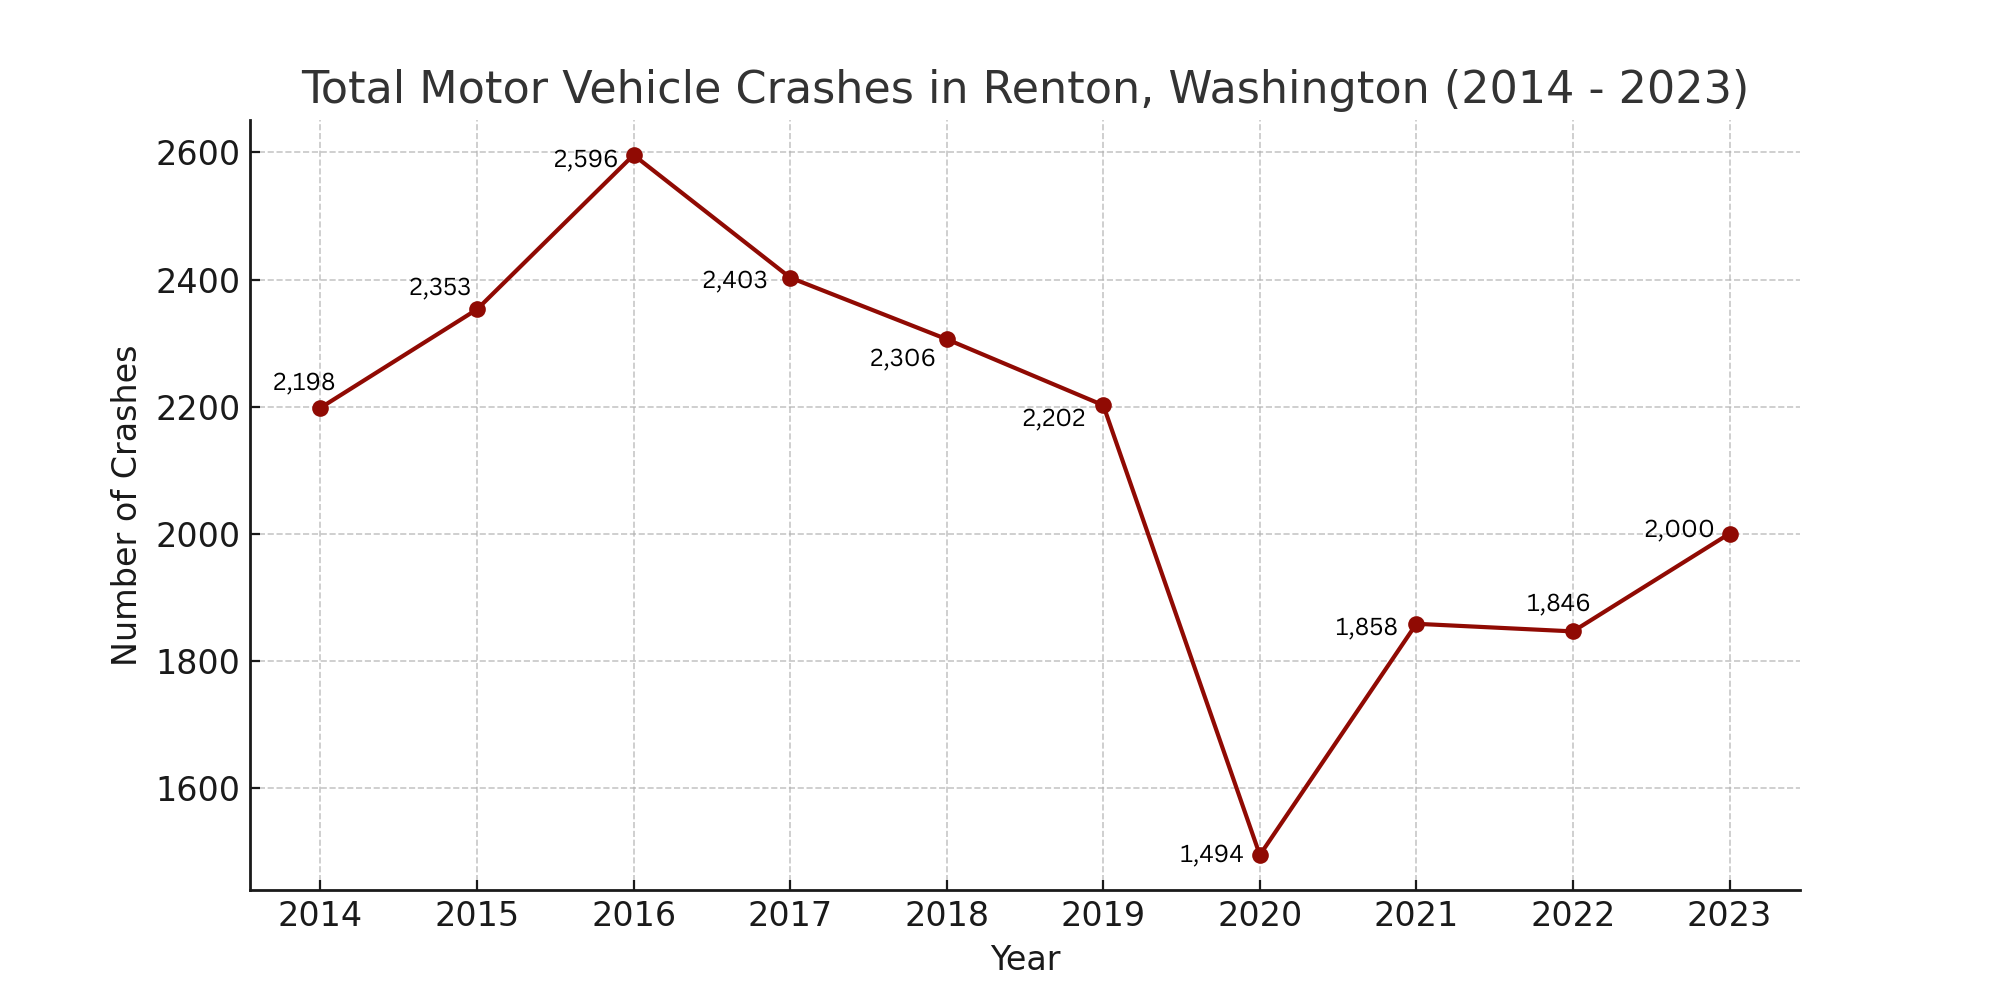 Line graph showing the total number of motor vehicle crashes in Renton, Washington, from 2014 to 2023. The data points are plotted on a two-dimensional graph with the x-axis representing the years 2014 through 2023 and the y-axis representing the number of crashes, ranging from around 1,500 to 2,600. The line is a deep red color, with individual data points marked by circles. The line peaks in 2016 with approximately 2,600 crashes, then shows a sharp decline in 2020, followed by a slight increase up to 2,000 crashes in 2023.